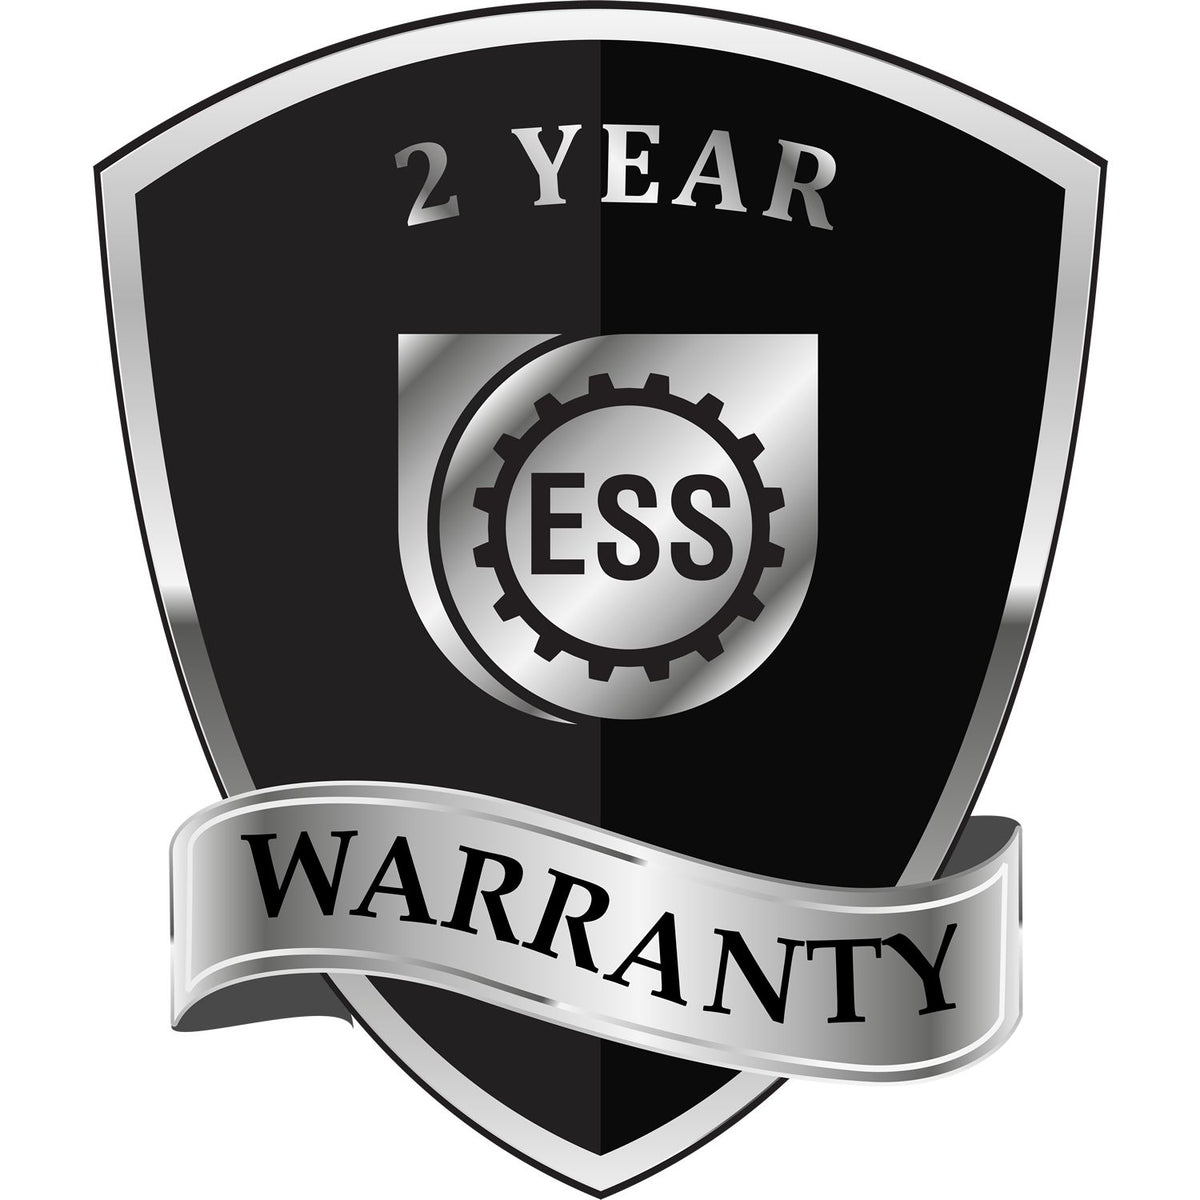 A black and silver badge or emblem showing warranty information for the Gift North Dakota Geologist Seal